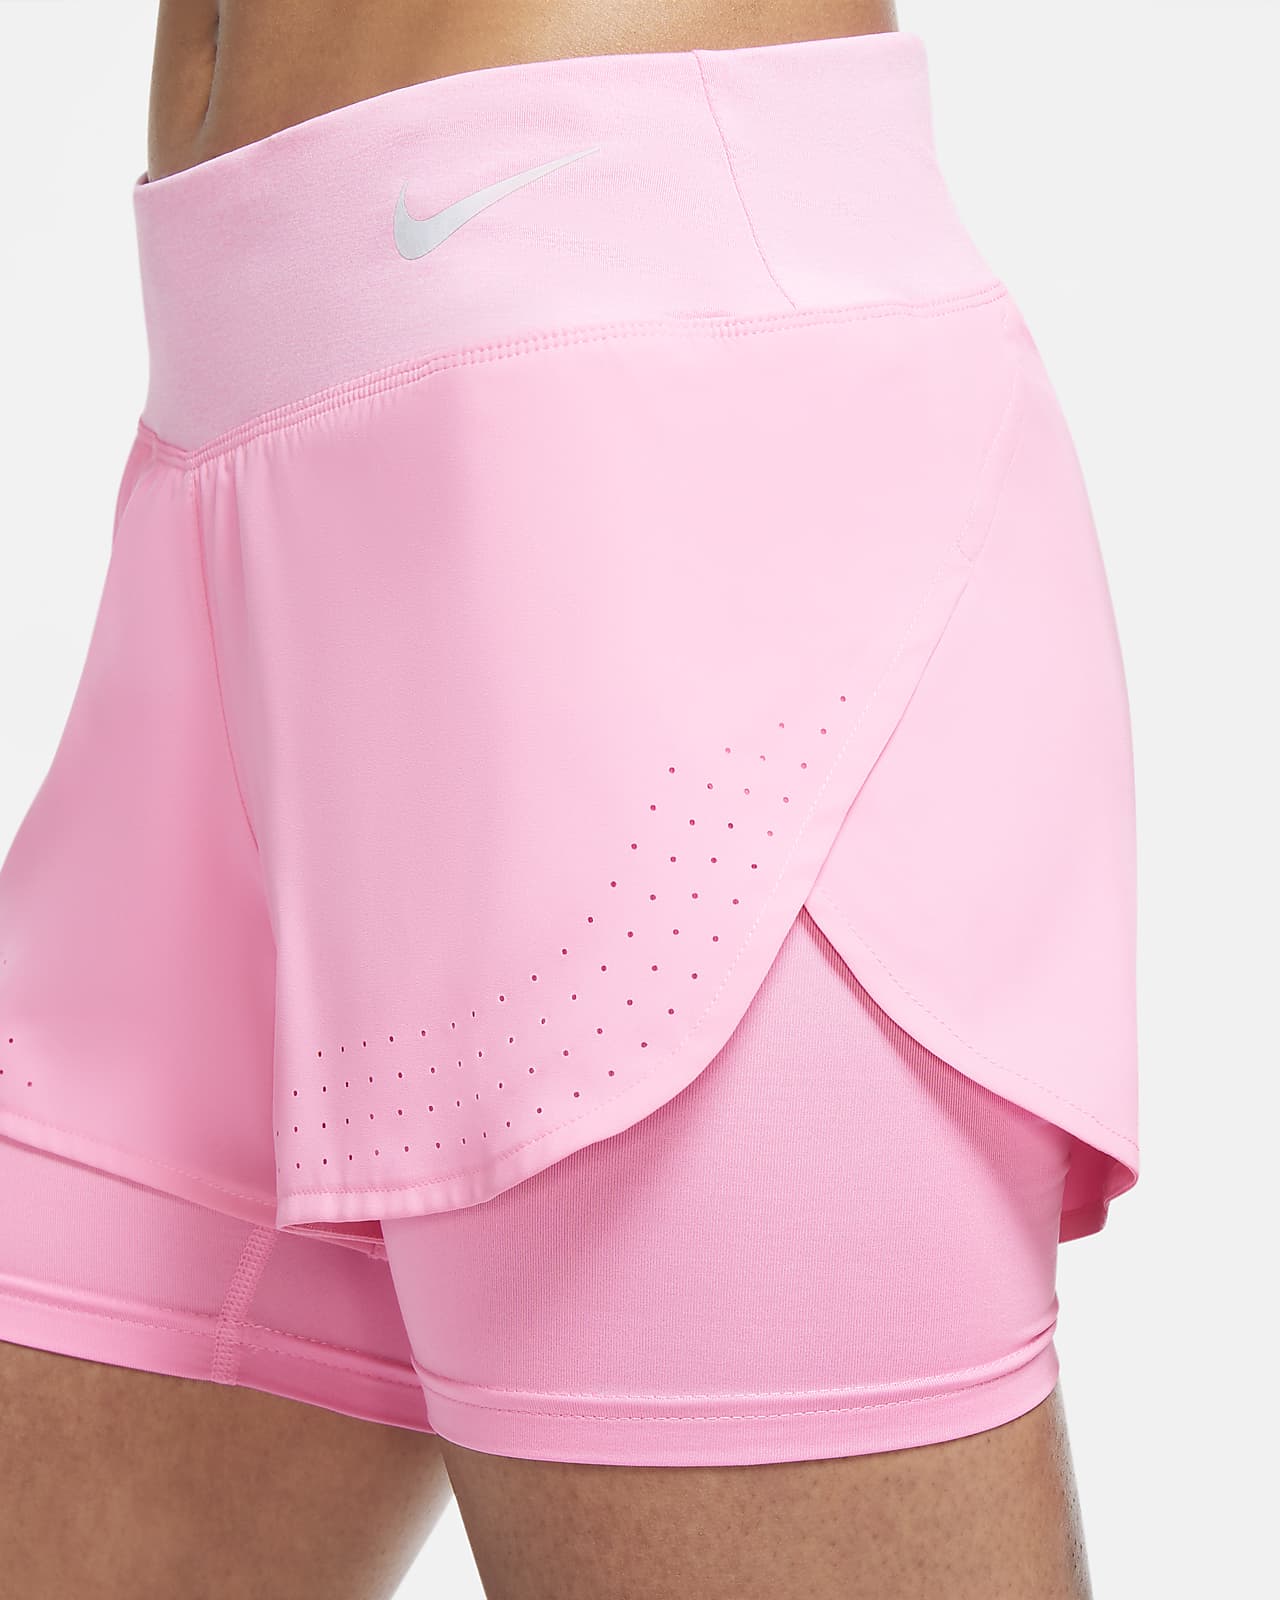 nike training 2 in 1 short in pink